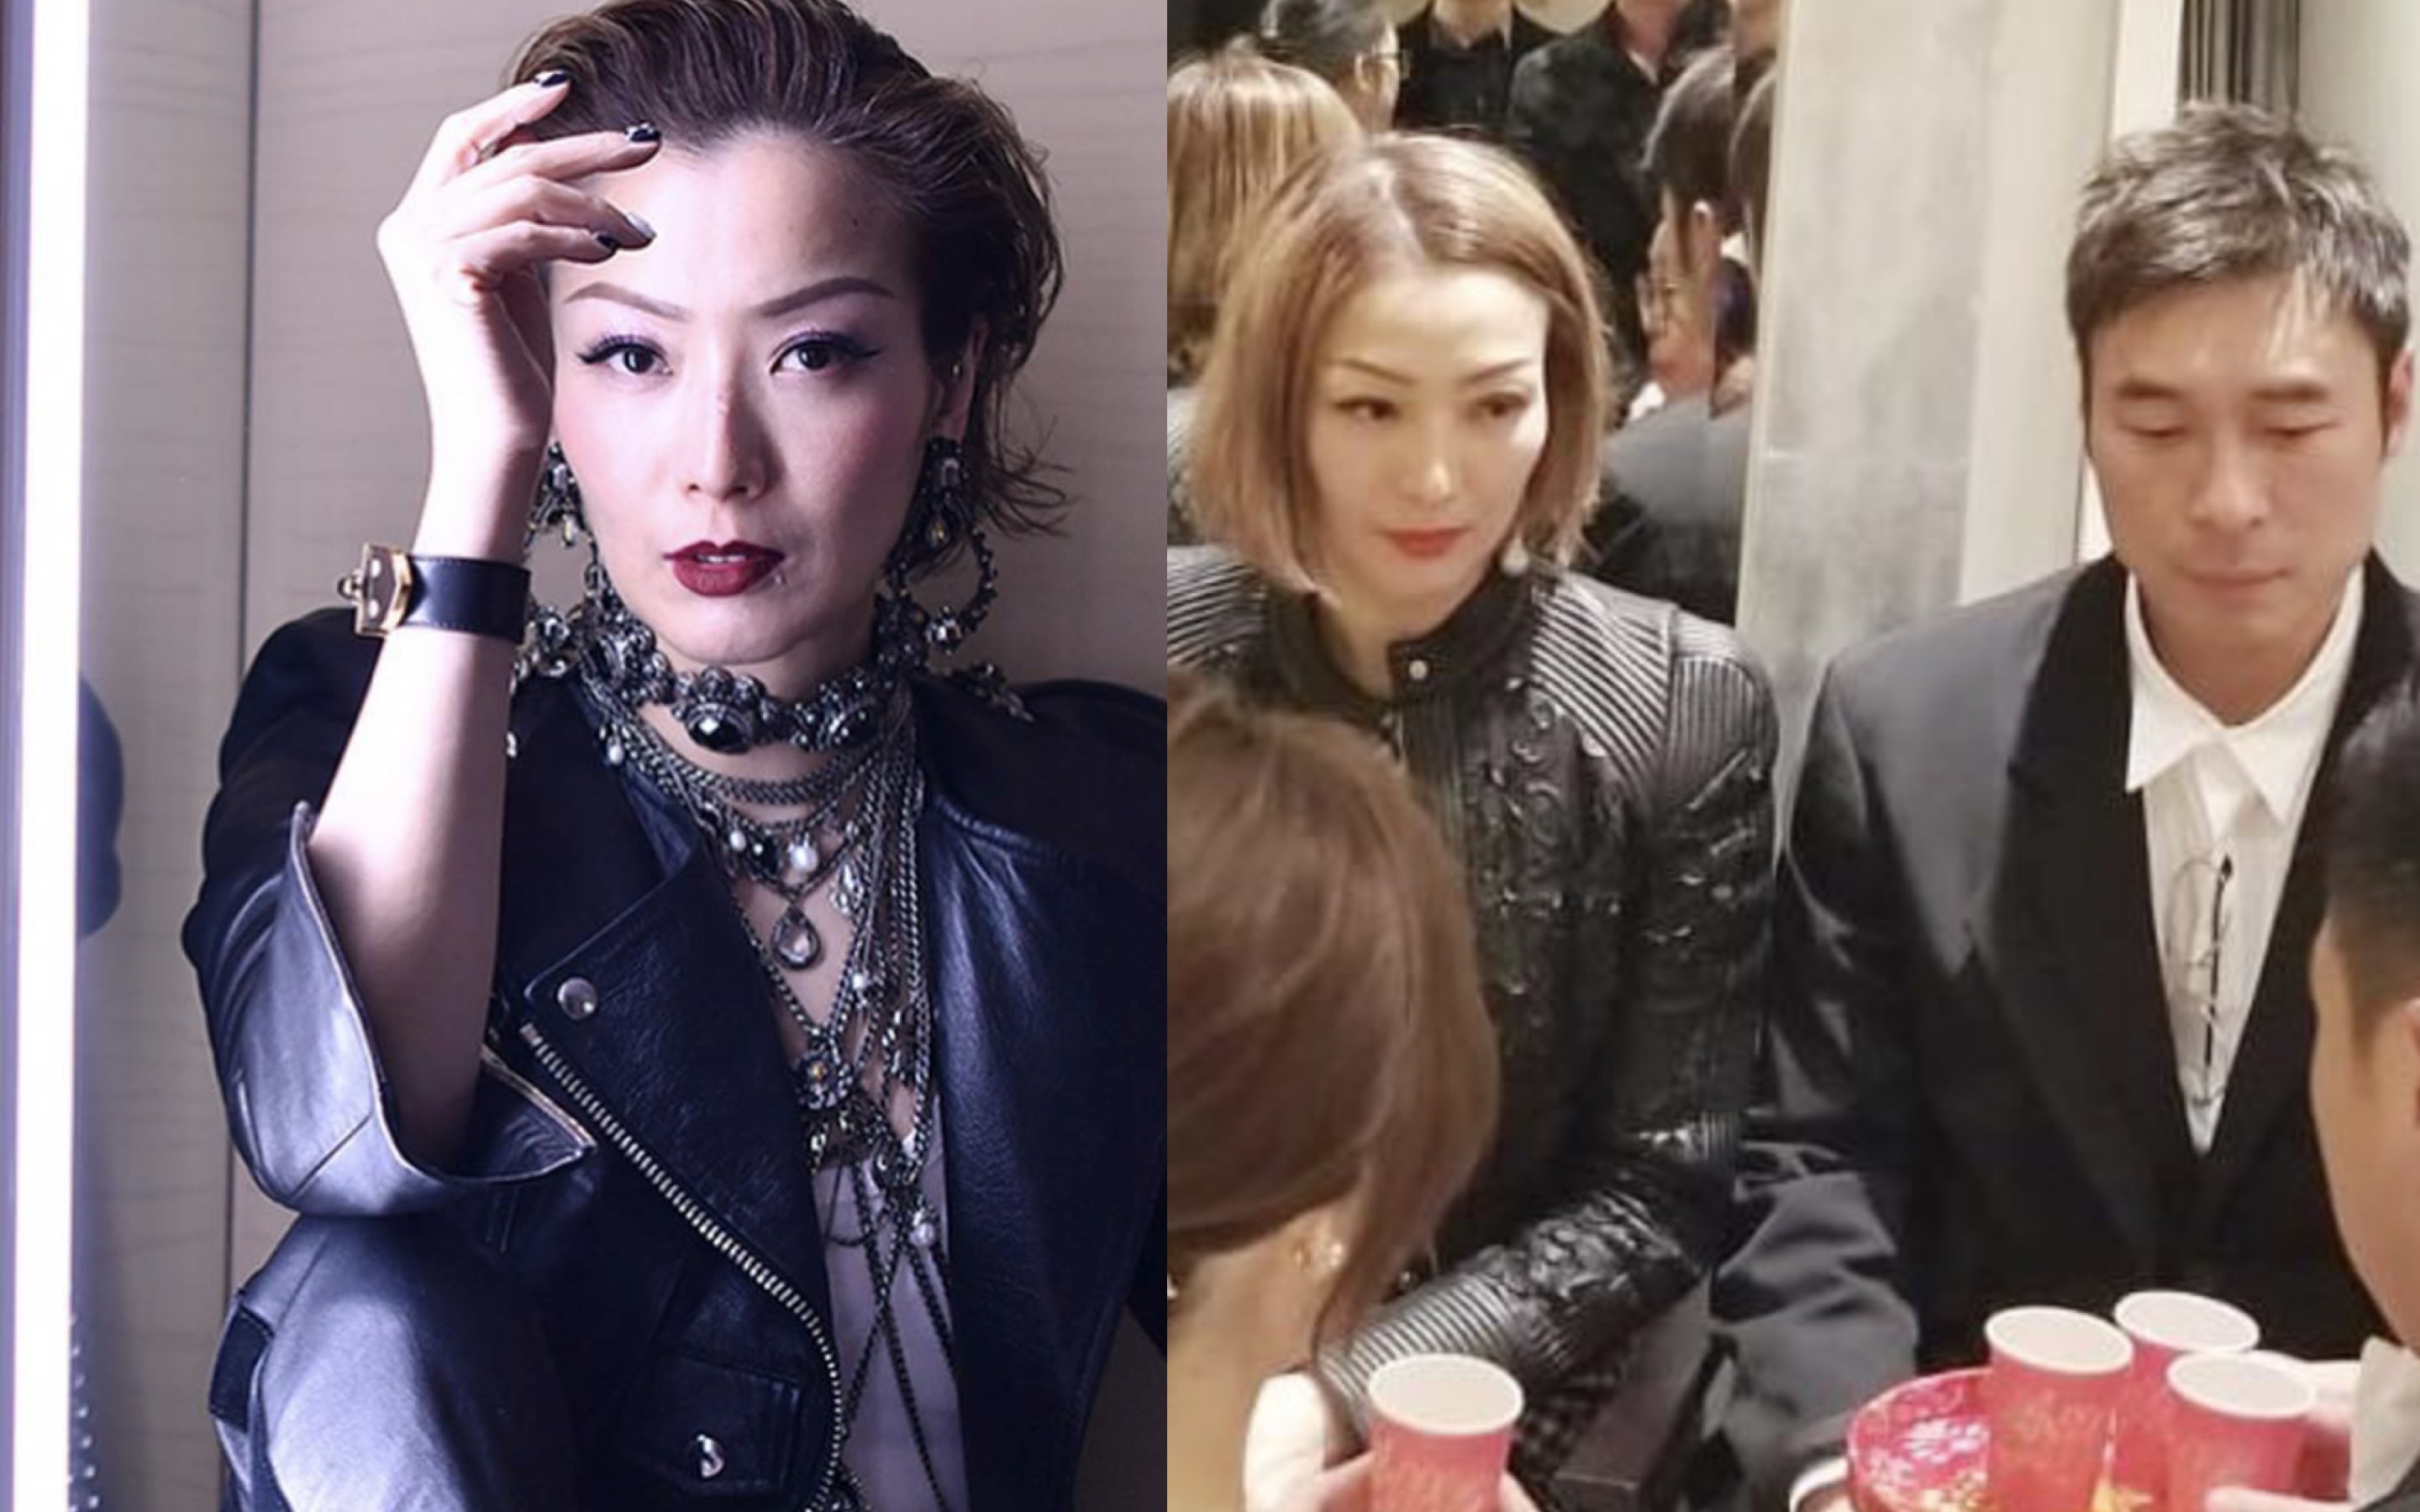 Sammi Cheng breaks her silence after her husband was caught on camera cheating on her. Photos via Instagram/ Sammi Cheng.